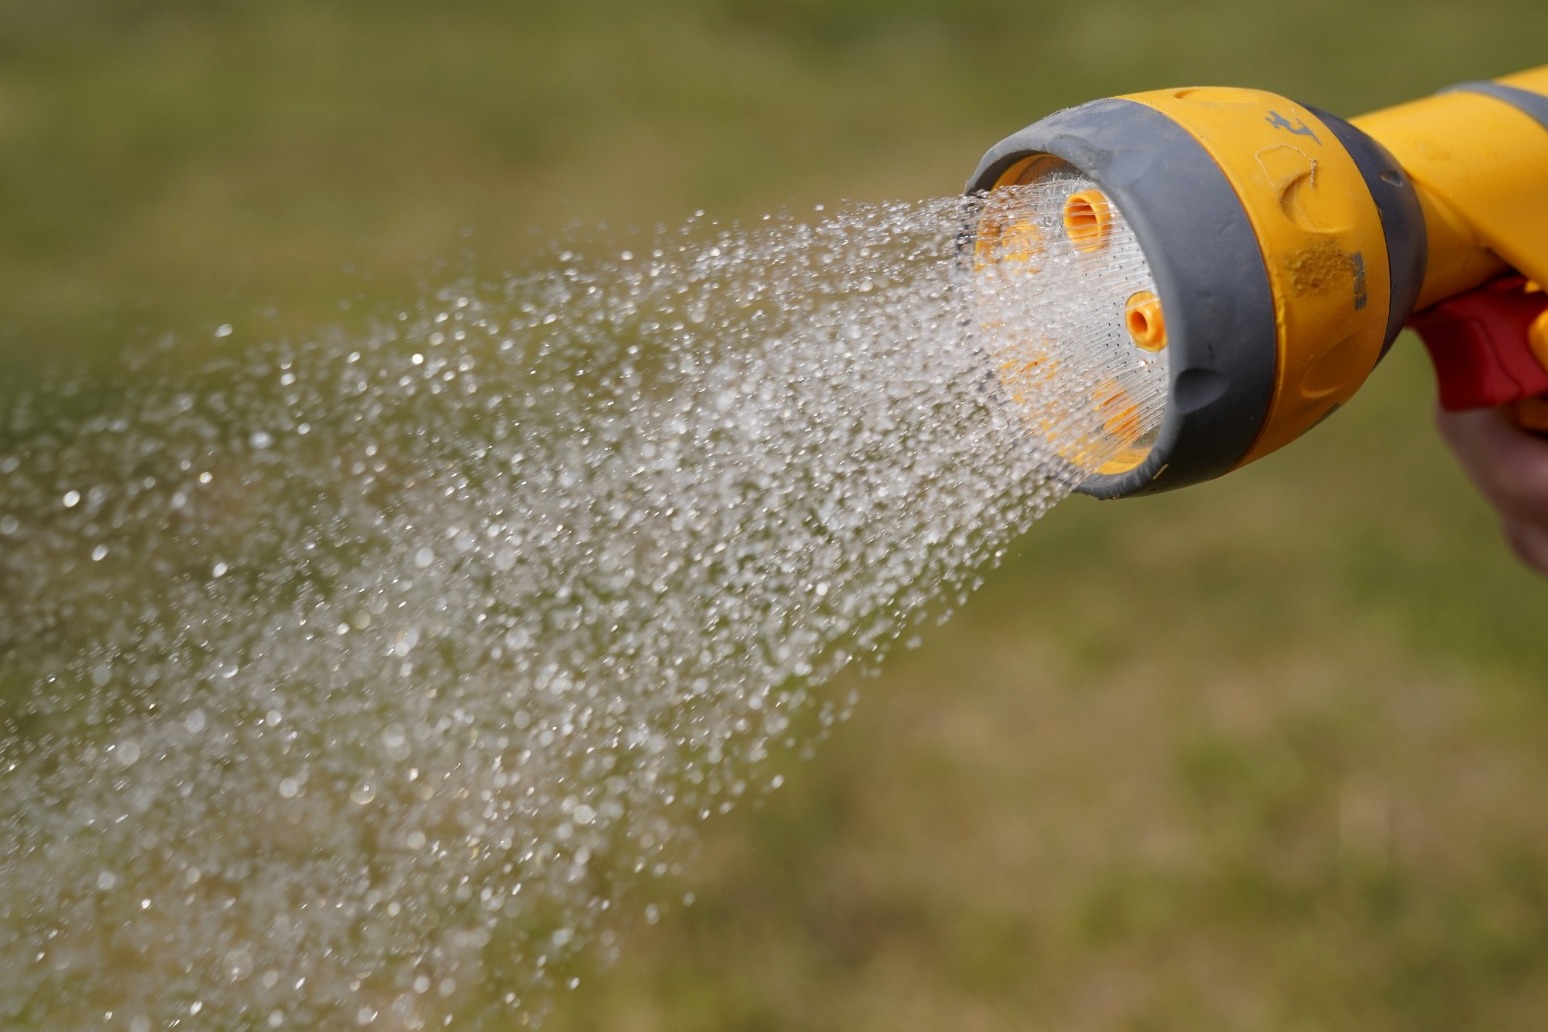 Hosepipe ban comes into force amid hot and dry conditions 